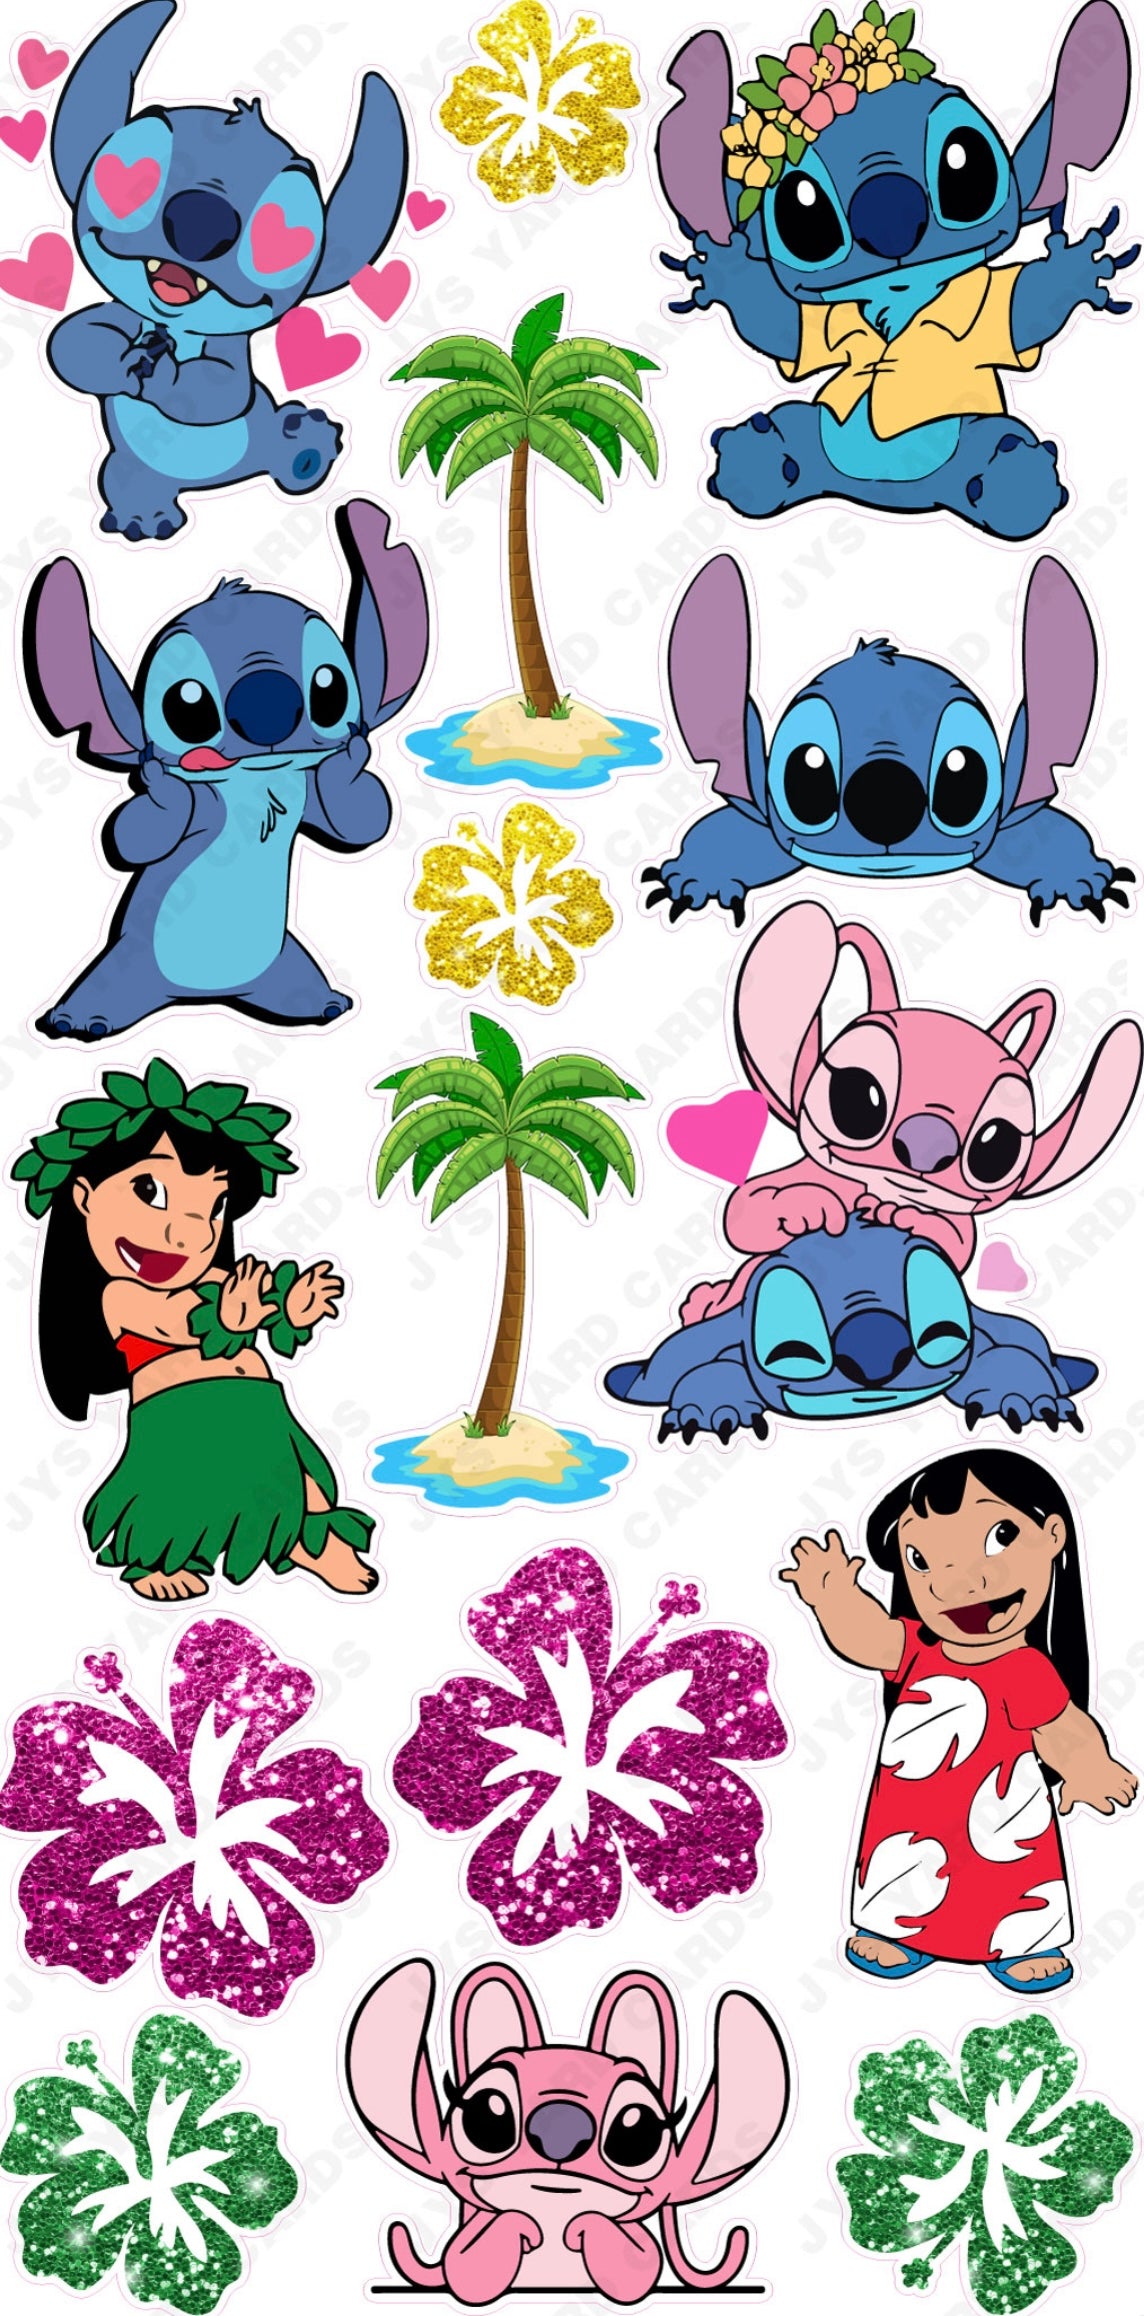 Lilo & Stitch Cutouts, Lilo, Stitch, Lilo Stitch Yard Signs, Lilo and Stitch  Background, Lilo and Stitch Party Theme, Lilo and Stitch Event 